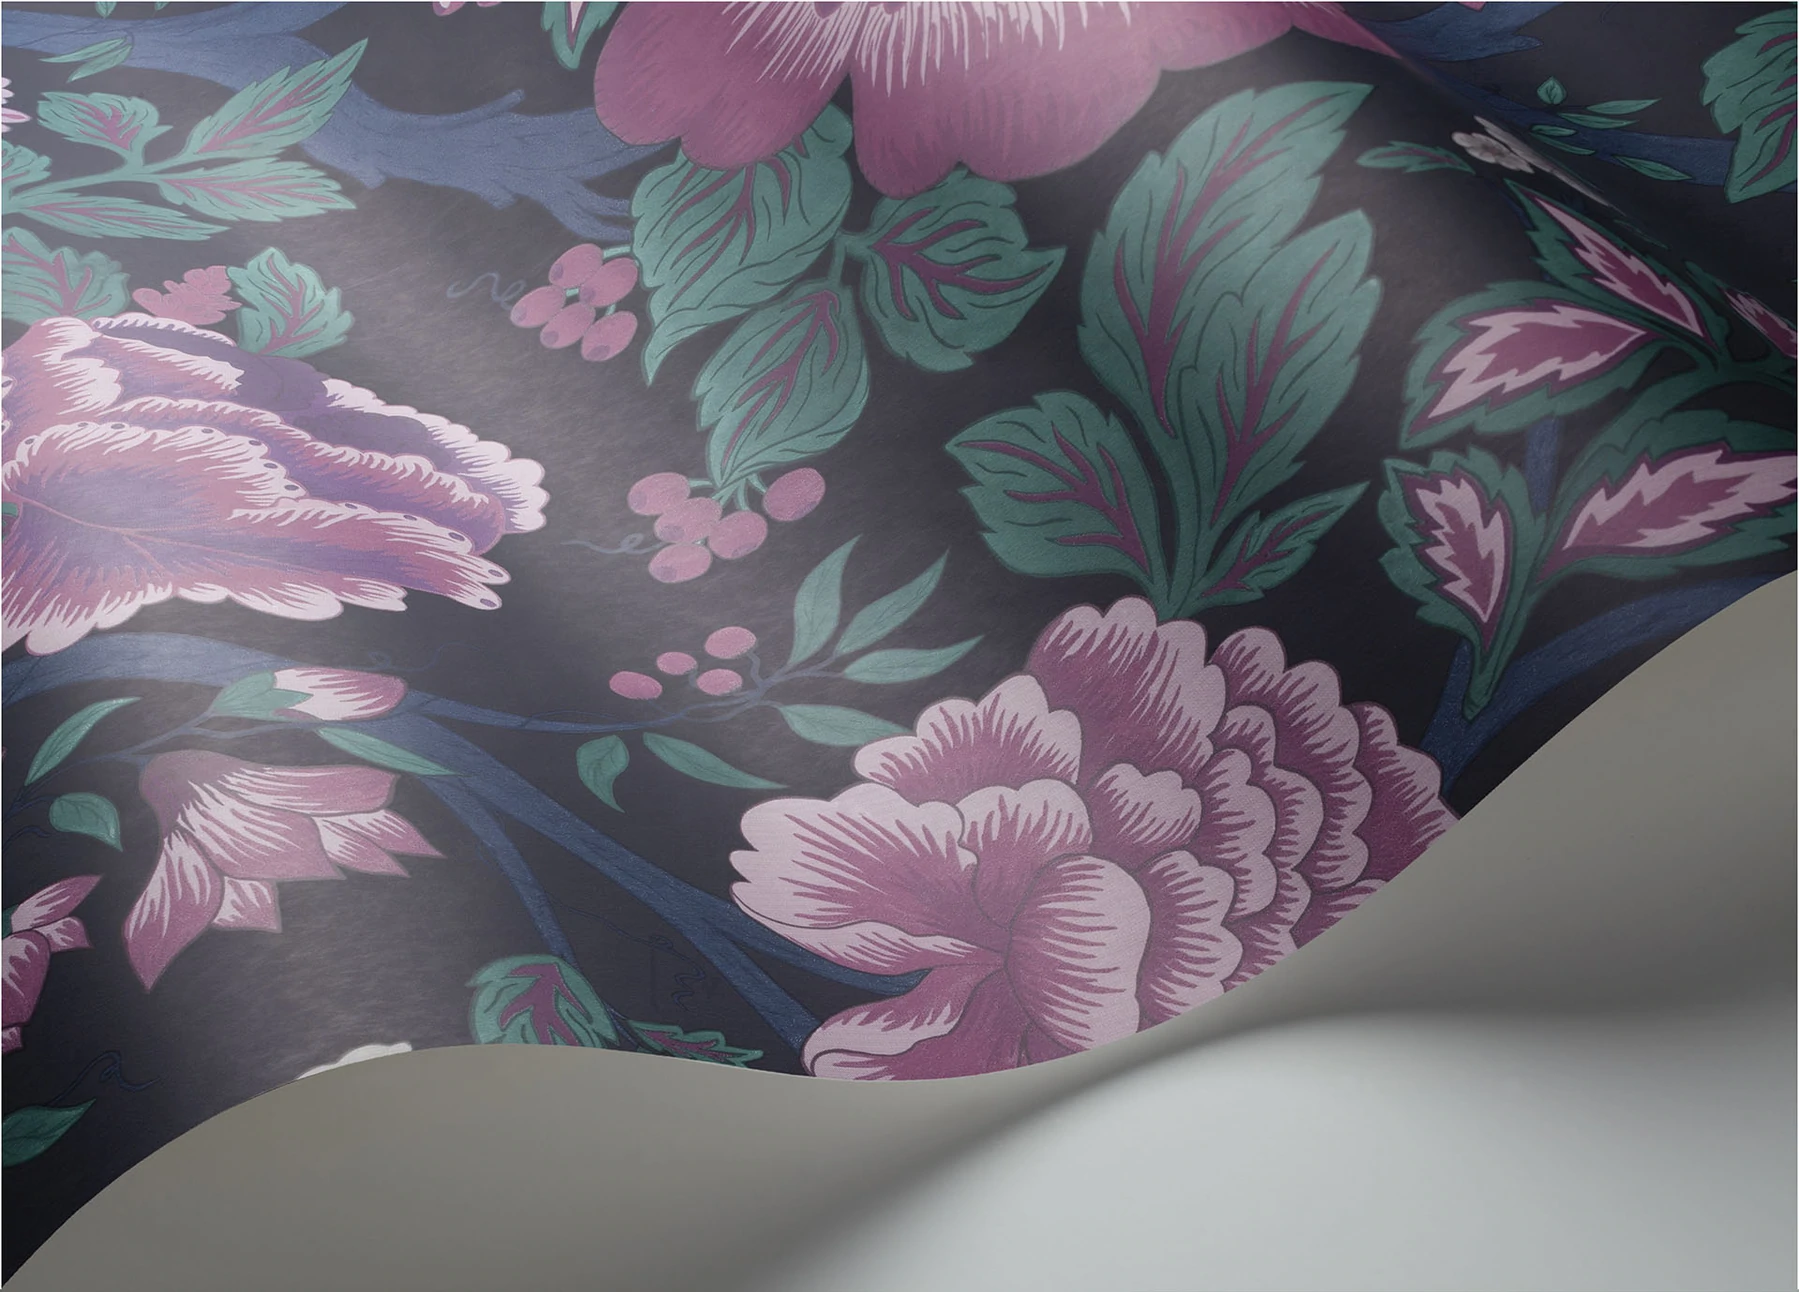 Midsummer Bloom Tapete - 116/4015 - Cole&Son - The Pearwood Collection